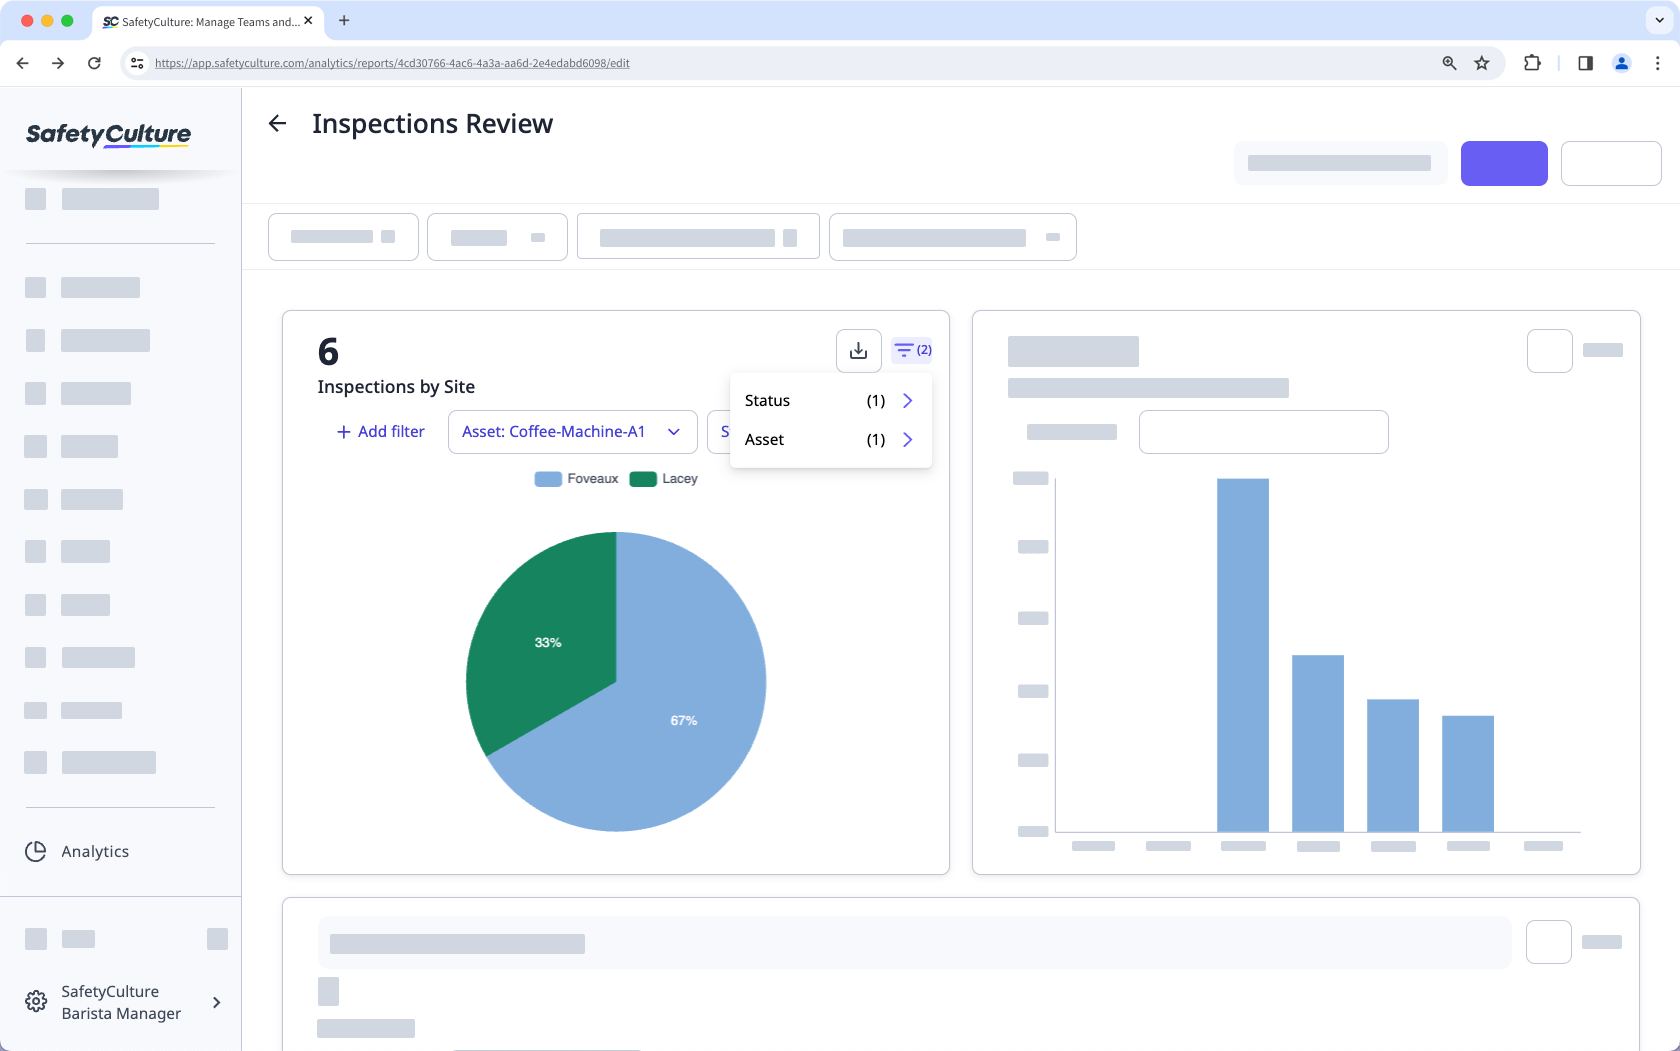 View chart-level filters you've applied in the new Analytics experience.